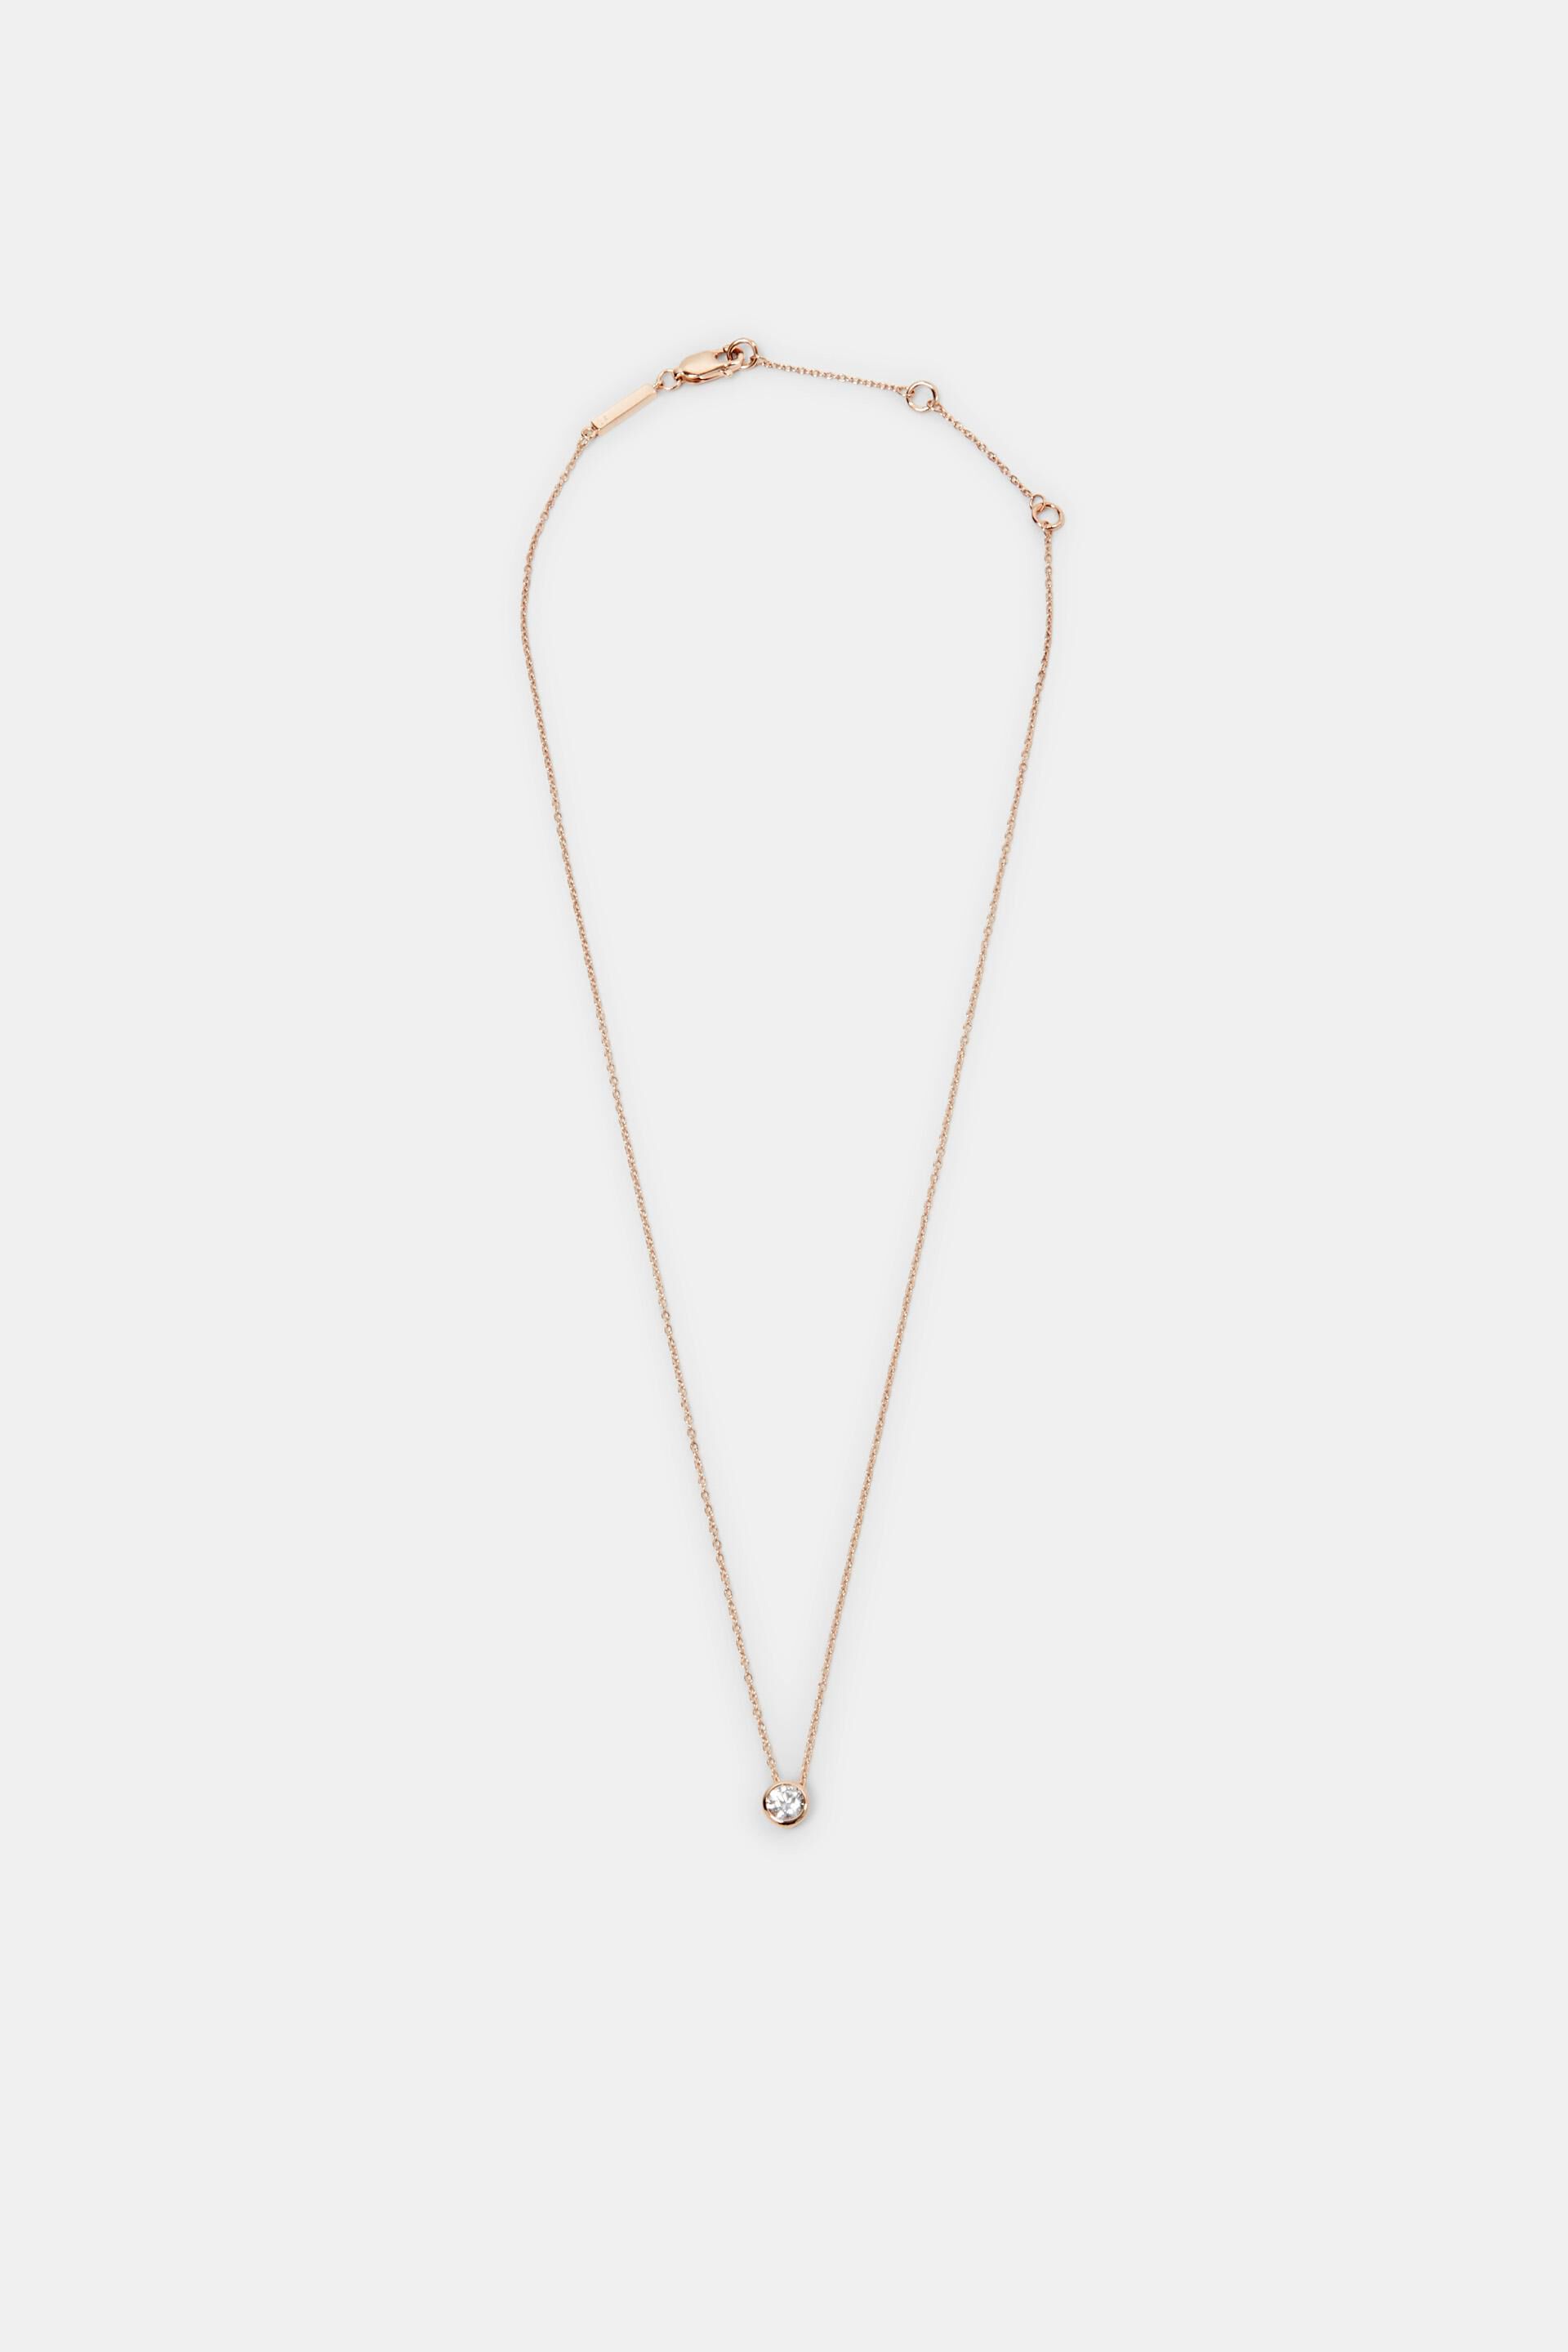 Esprit Online Store Necklace with zirconia, silver sterling